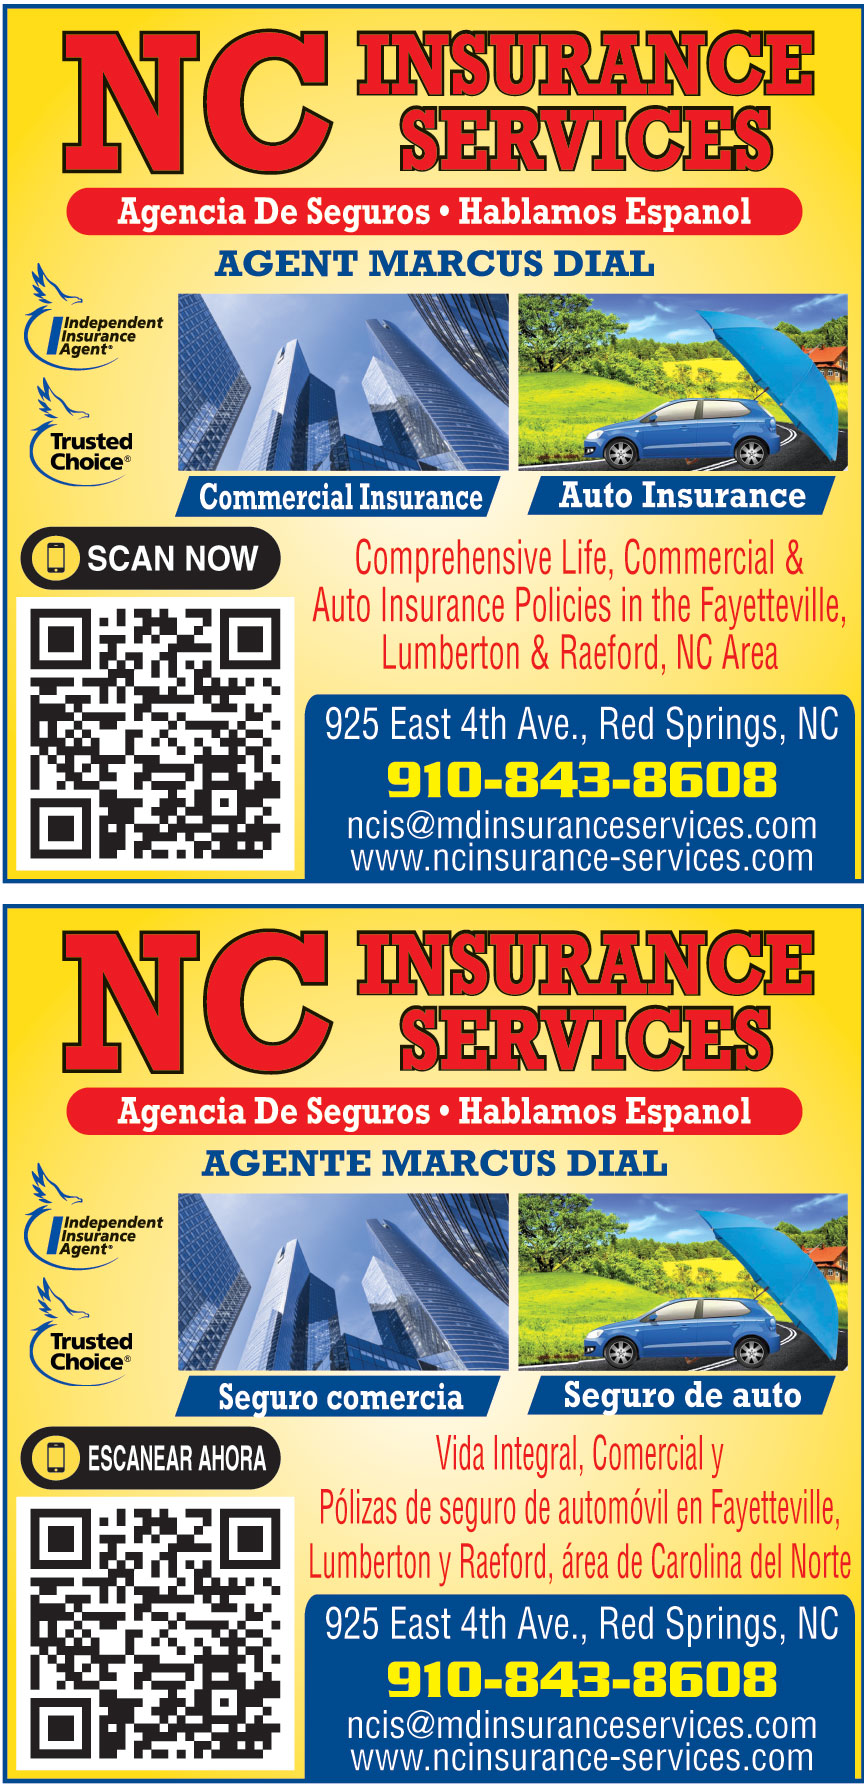 NC INSURANCE SERVICES